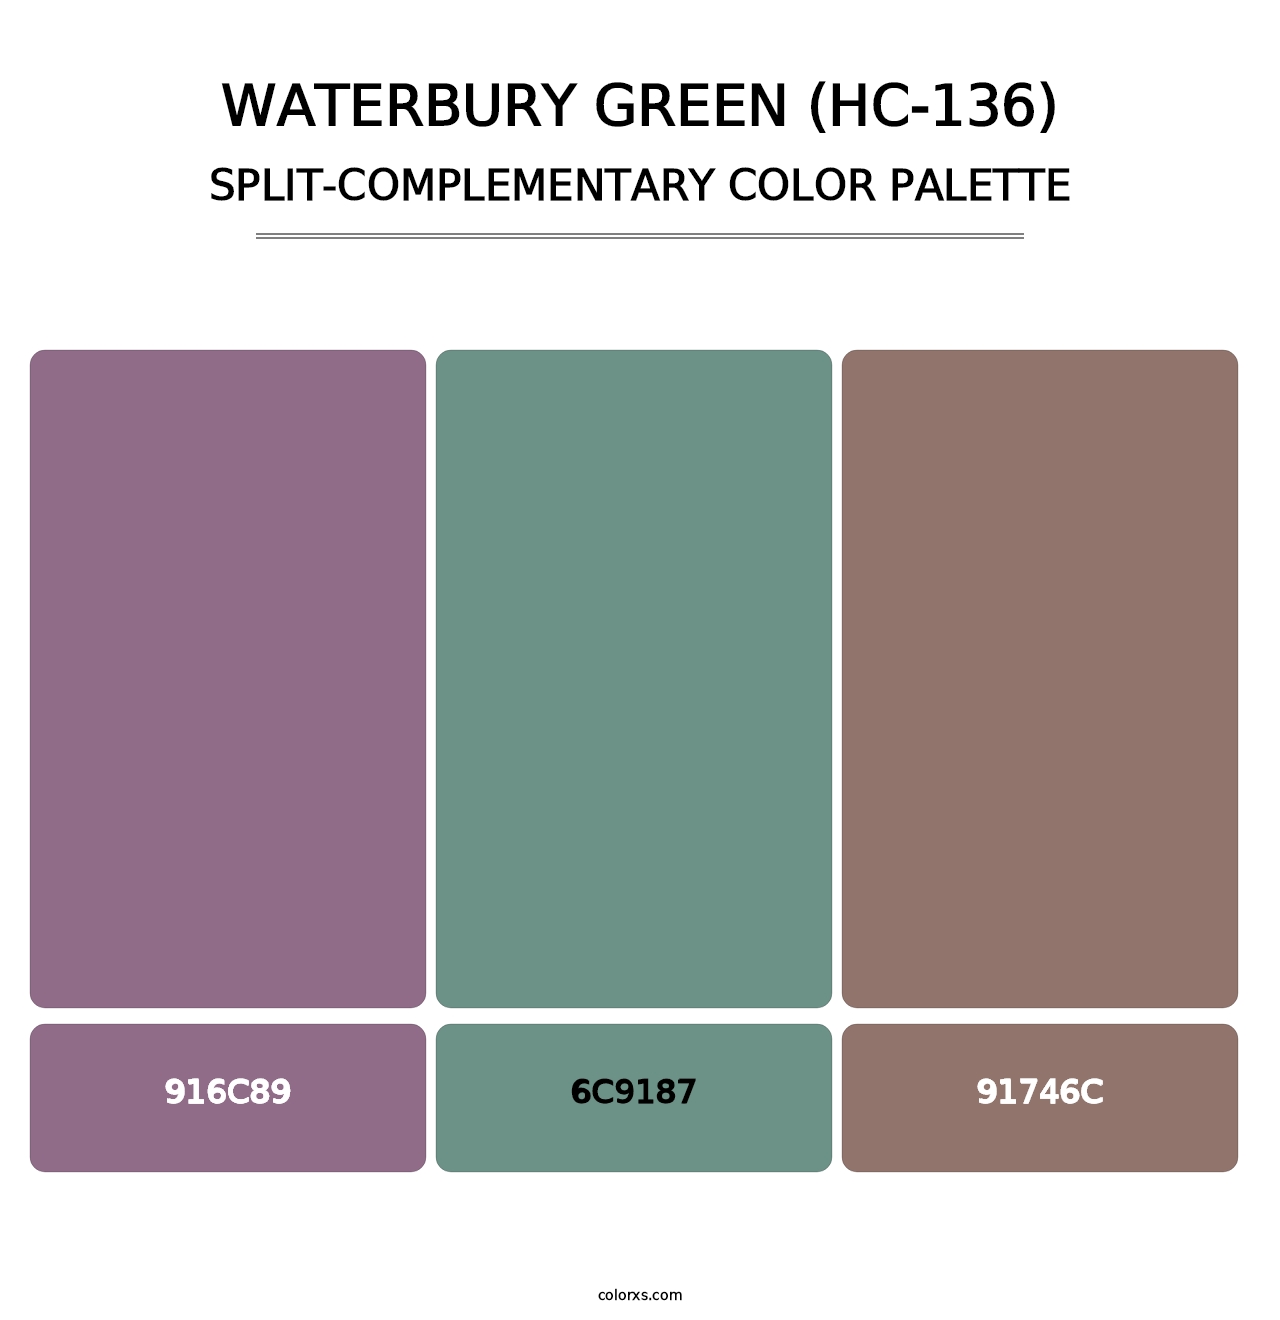 Waterbury Green (HC-136) - Split-Complementary Color Palette